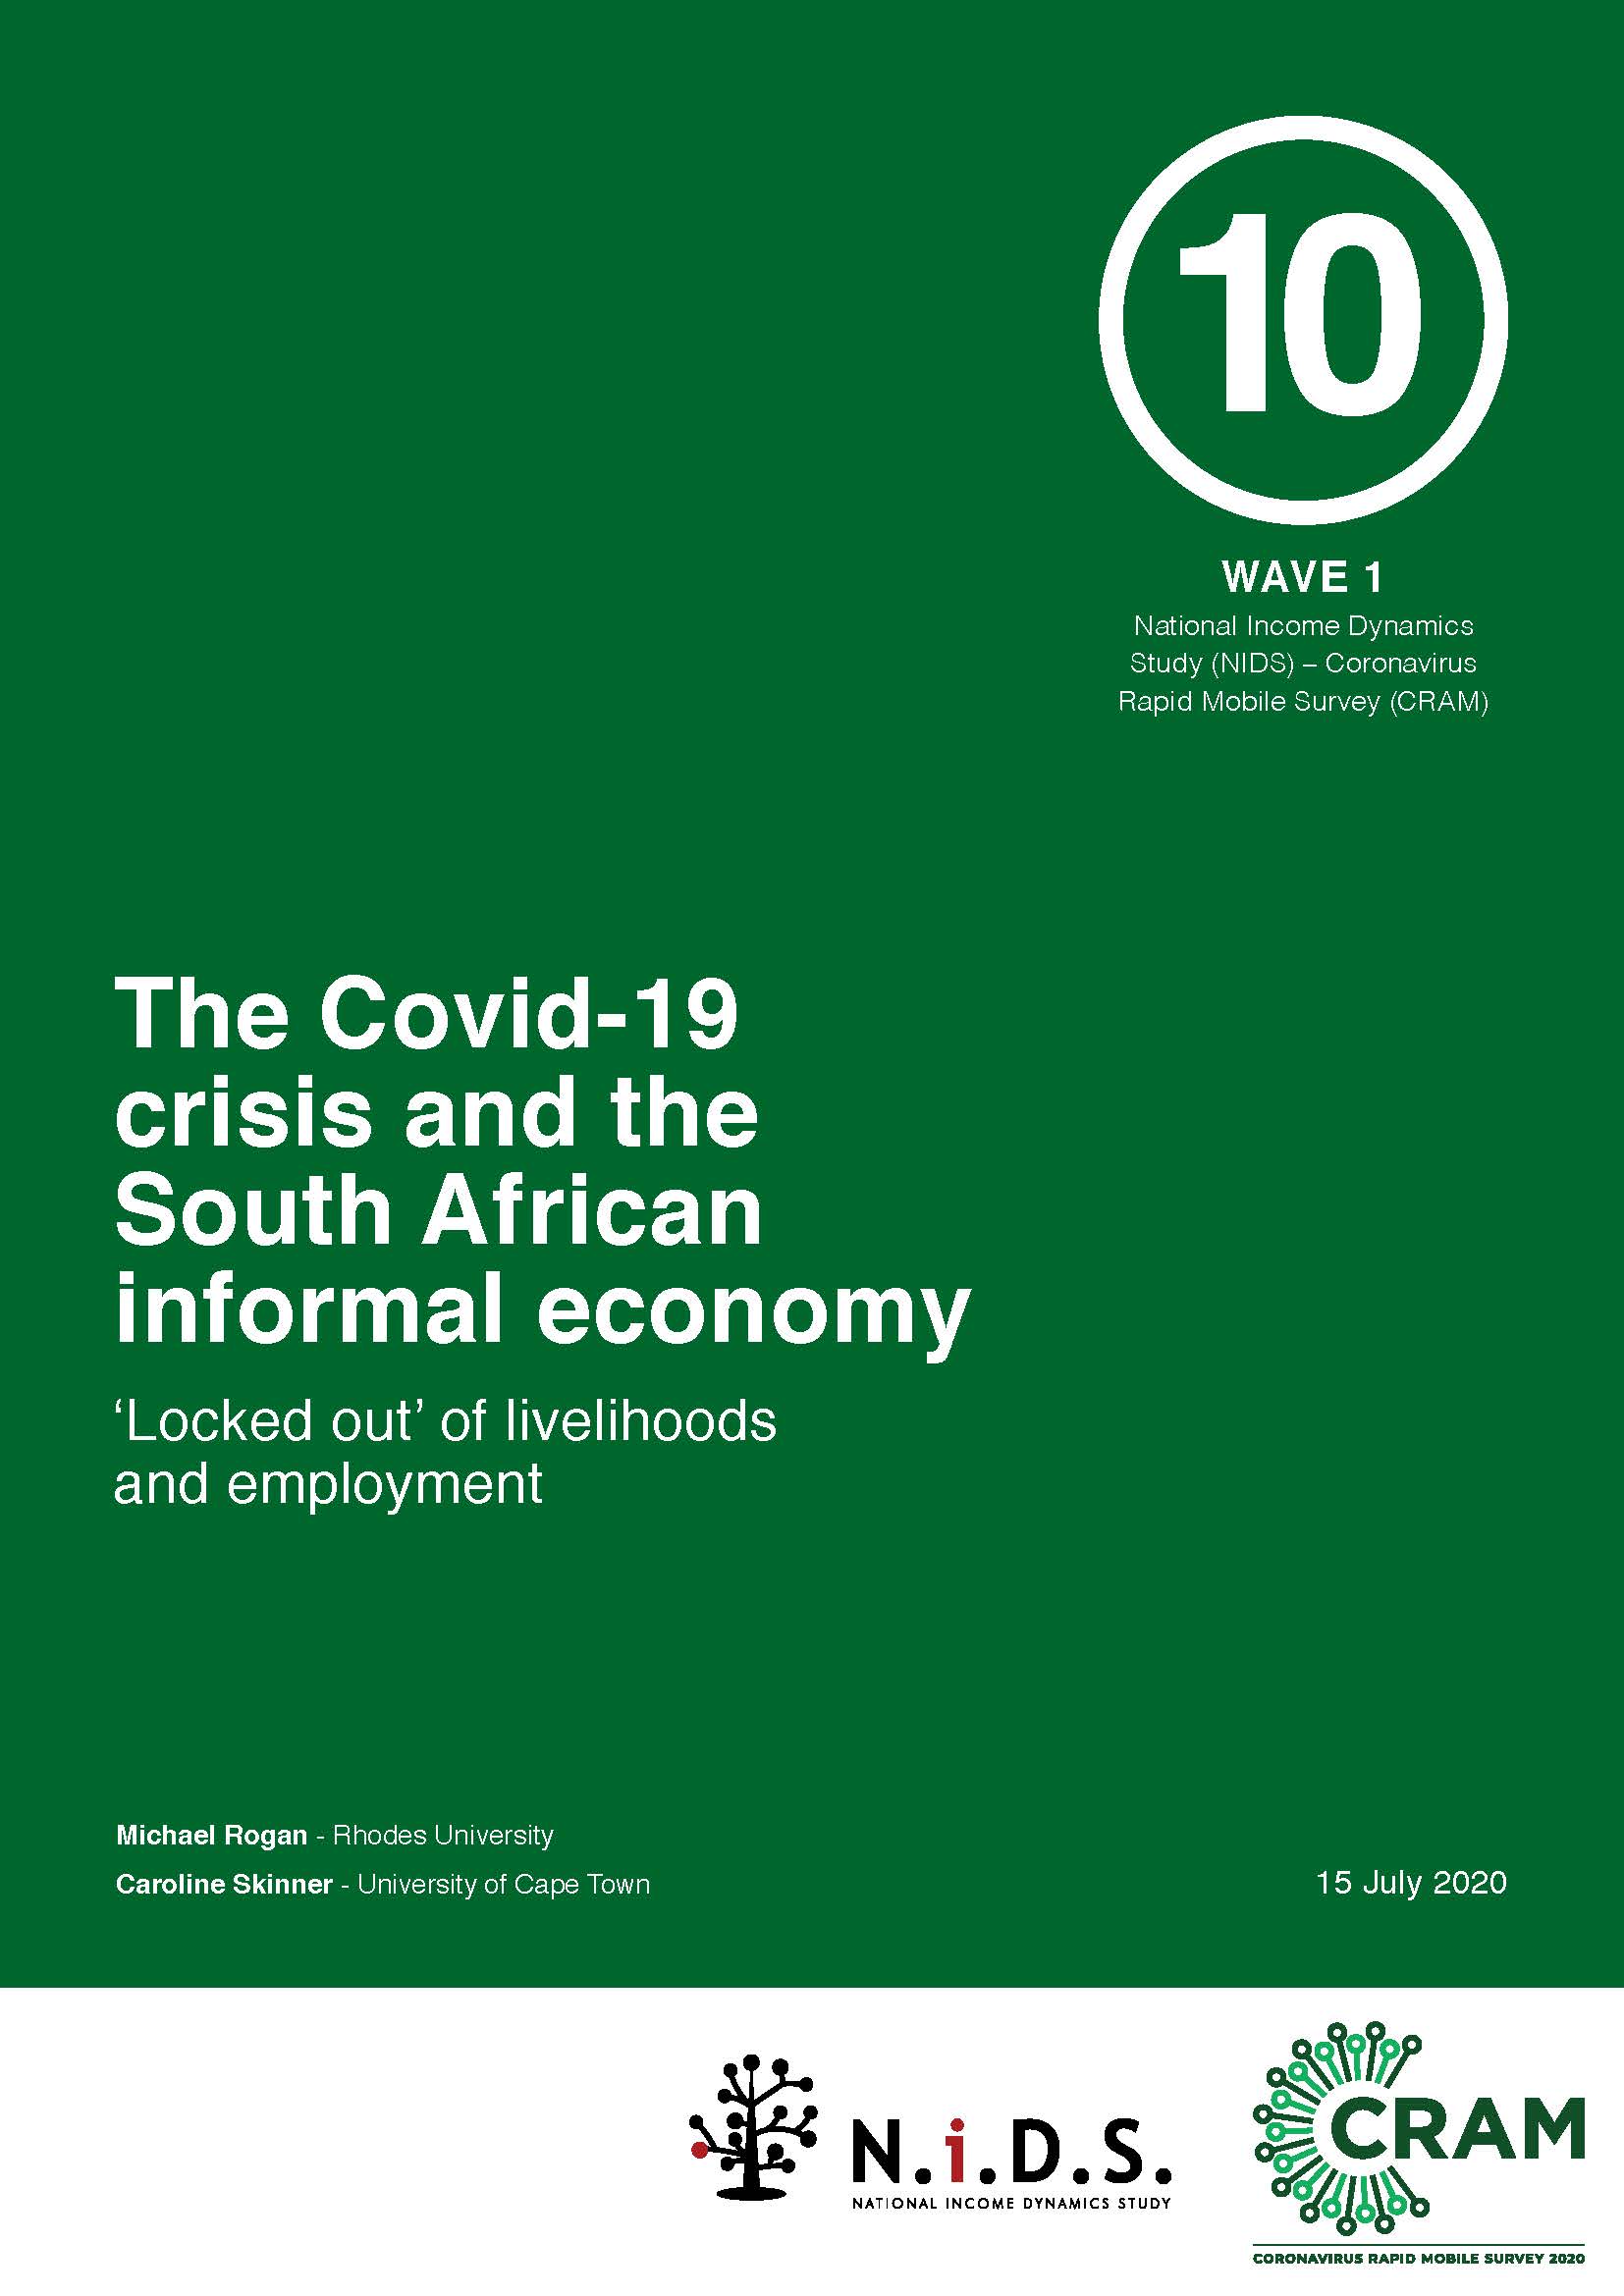 Covid crisis and the South African informal economy.